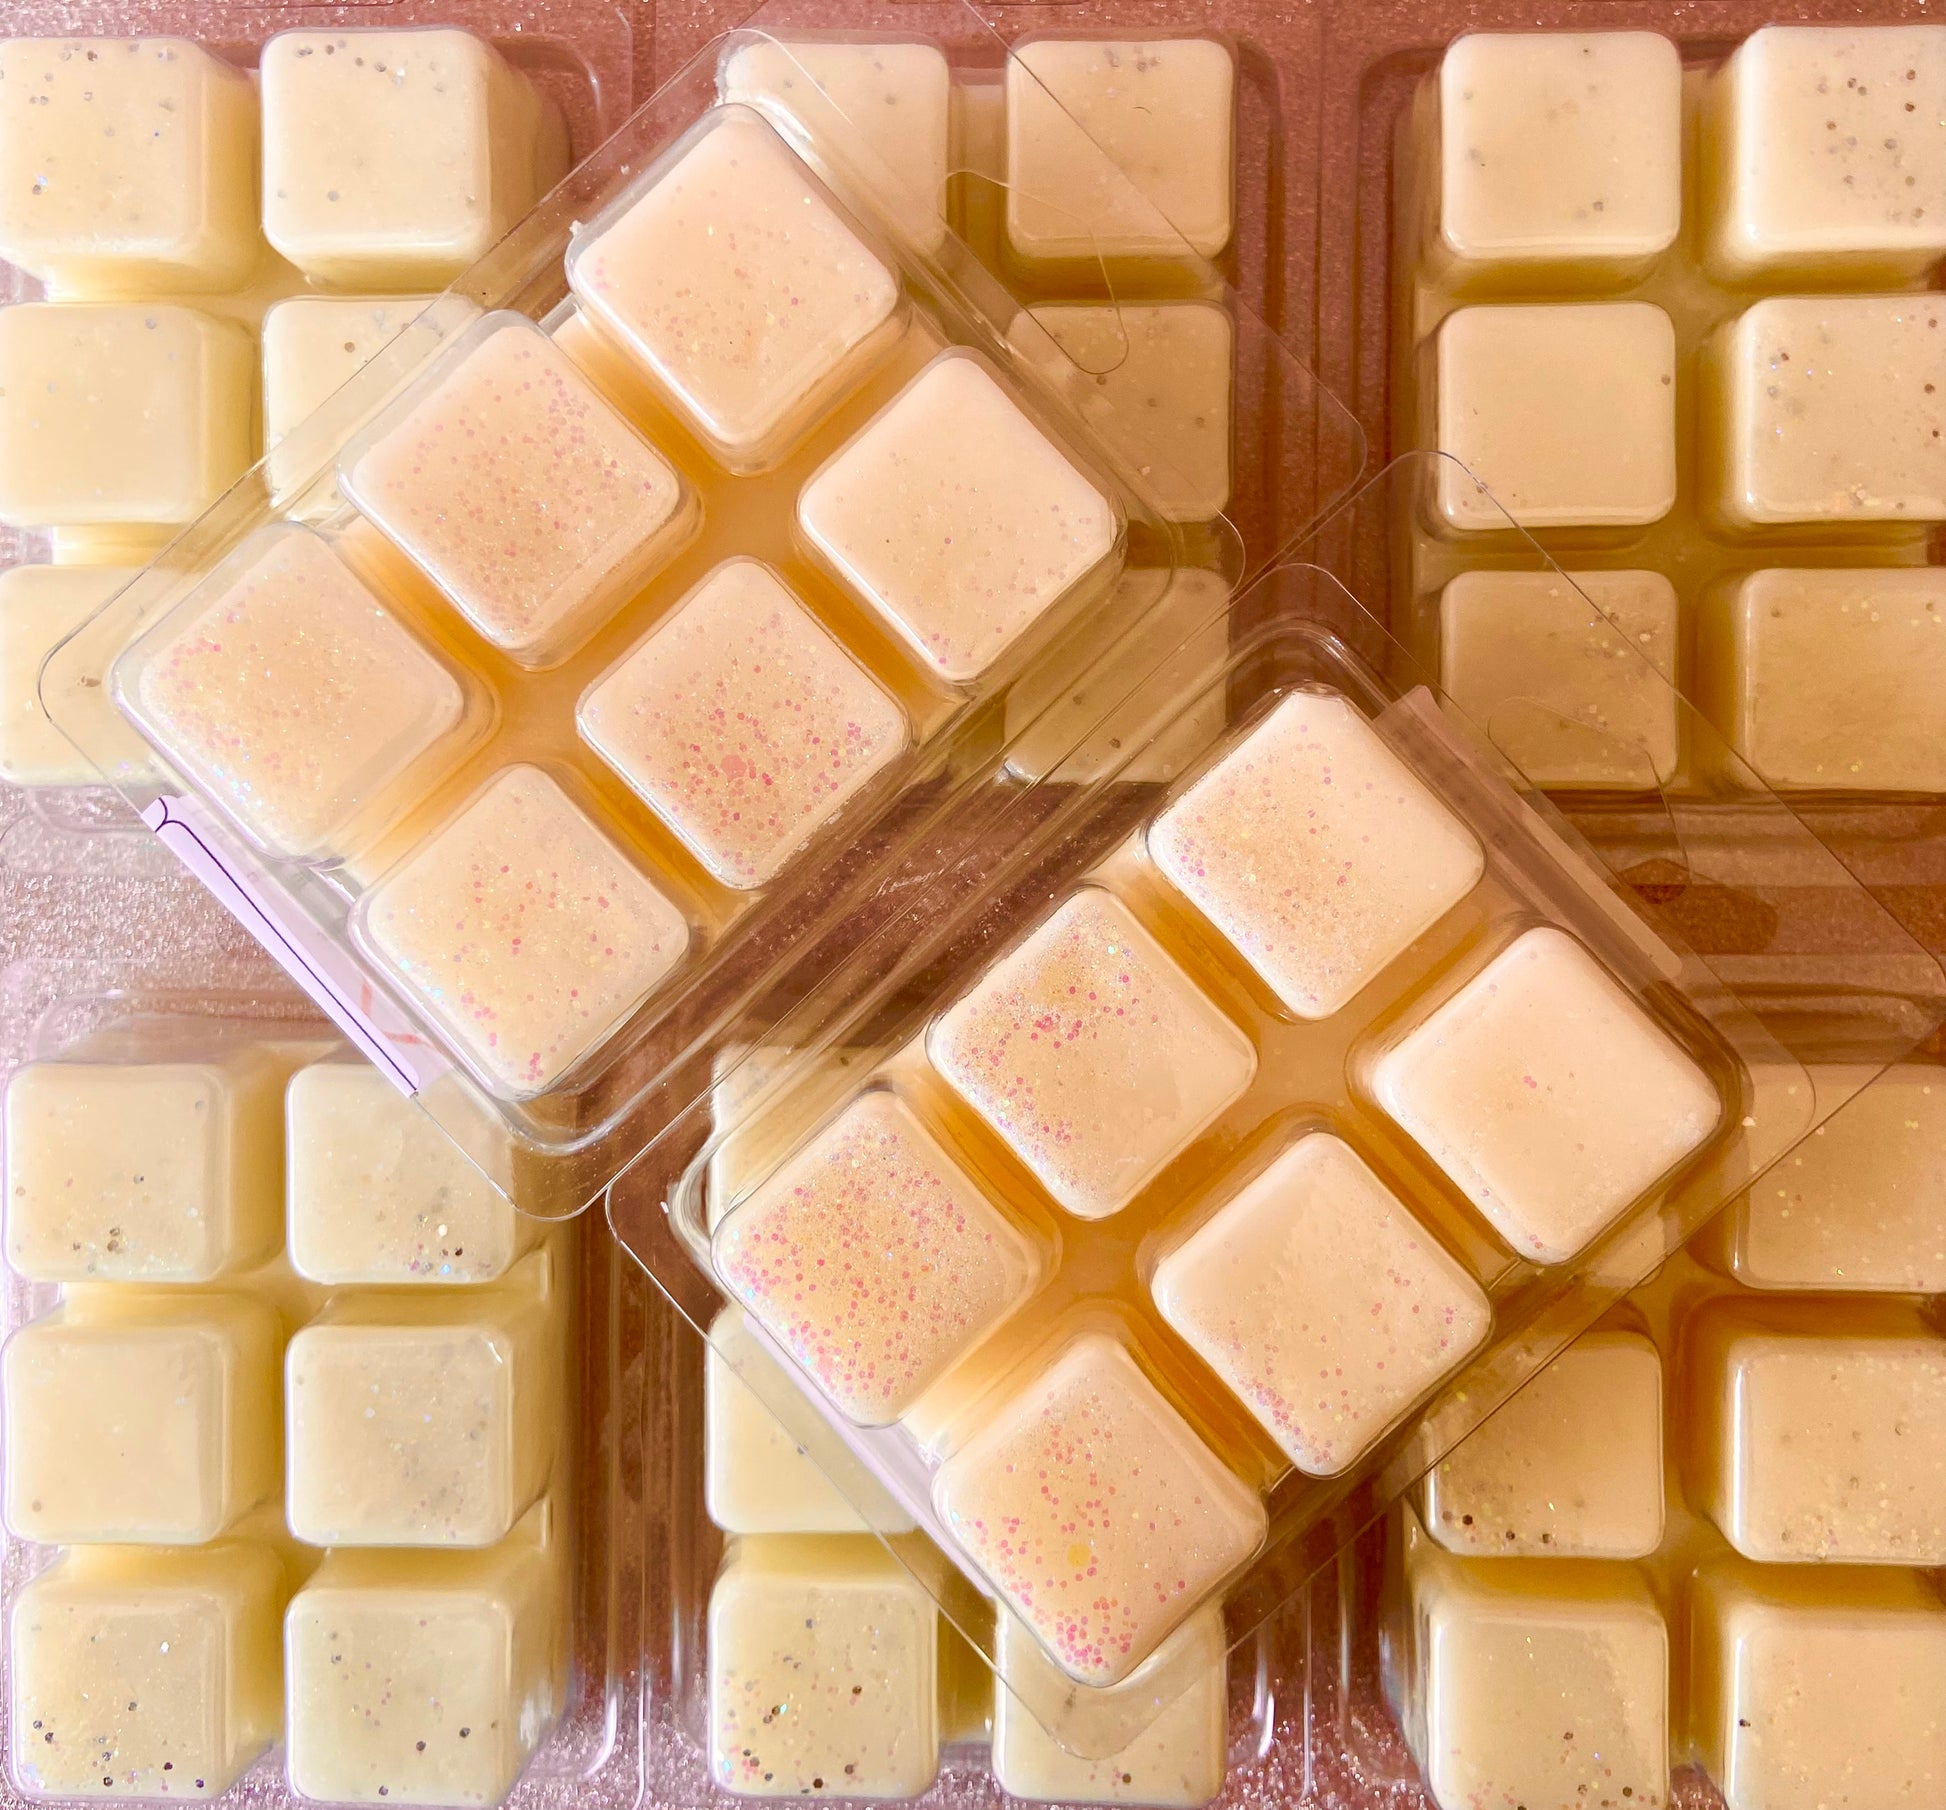 Plastic trays of The Soap Gal x Hot Apple Pie Wax Melt in a variety of pastel colors and sprinkled with glitter, stacked and arranged in a close-up view. The Apple Pie scent wafts through, evoking the warmth of an Autumn Wax Melt collection.